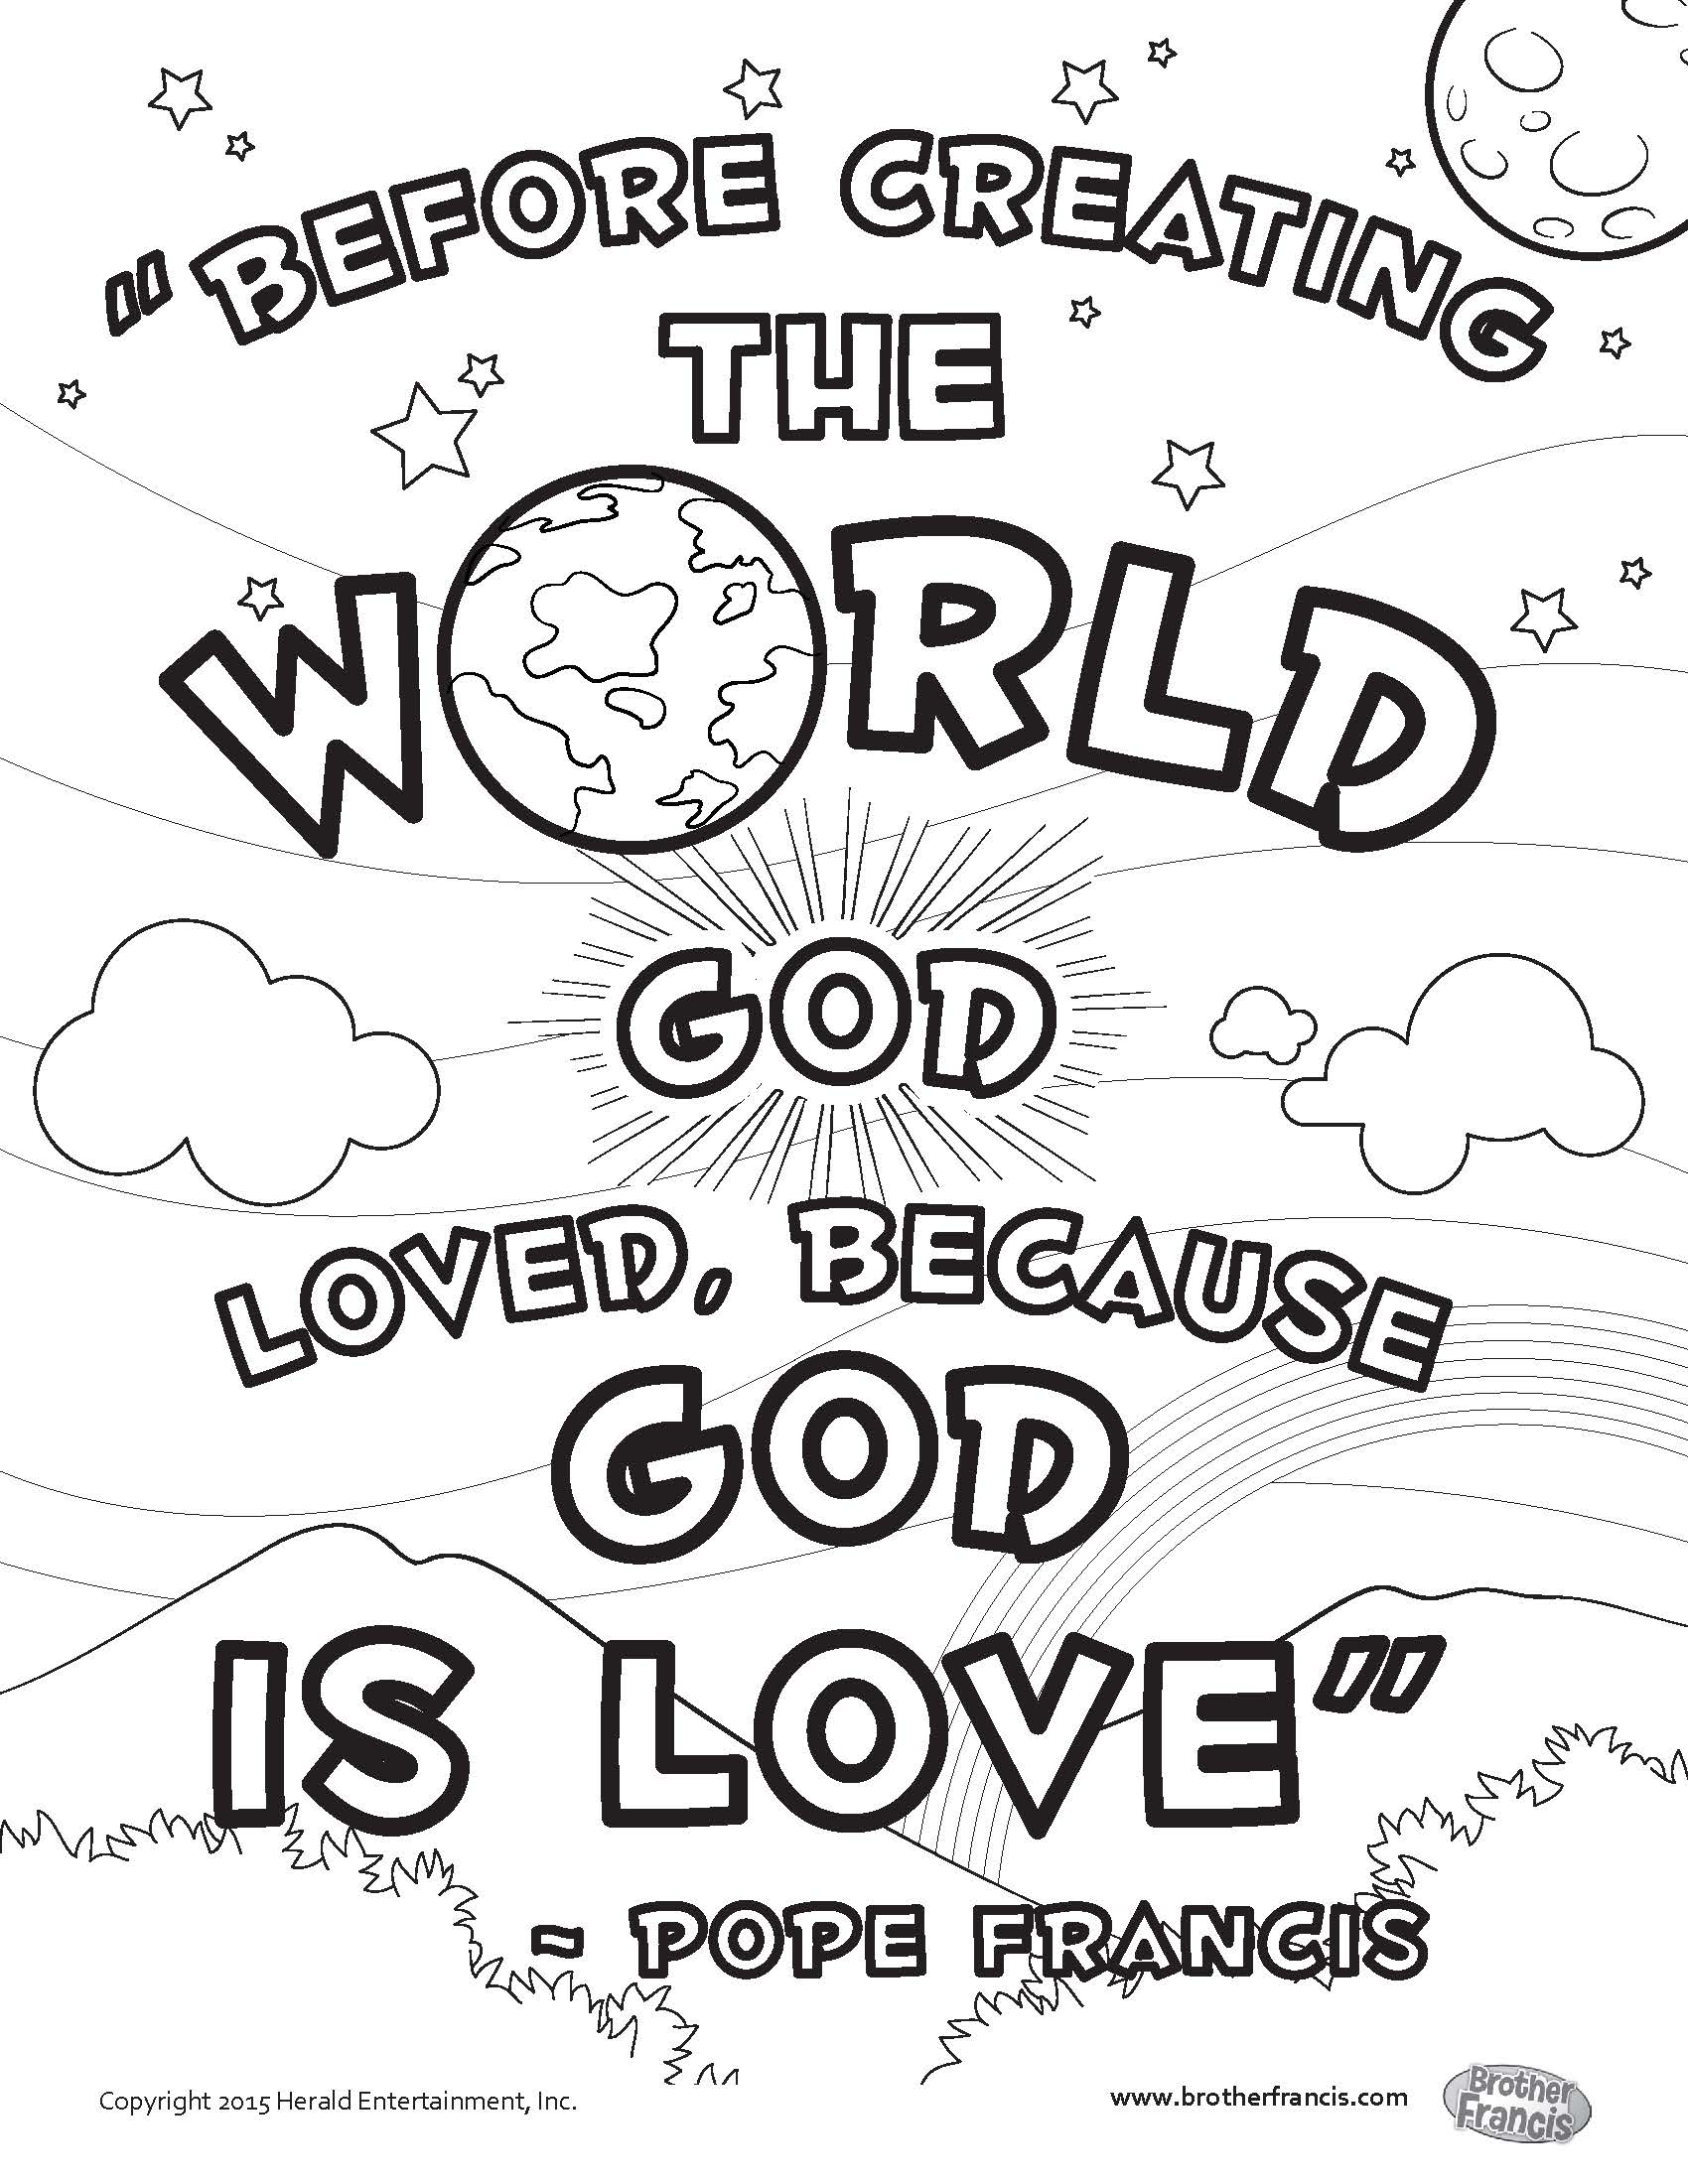 Download and Print - God is Love Coloring Page